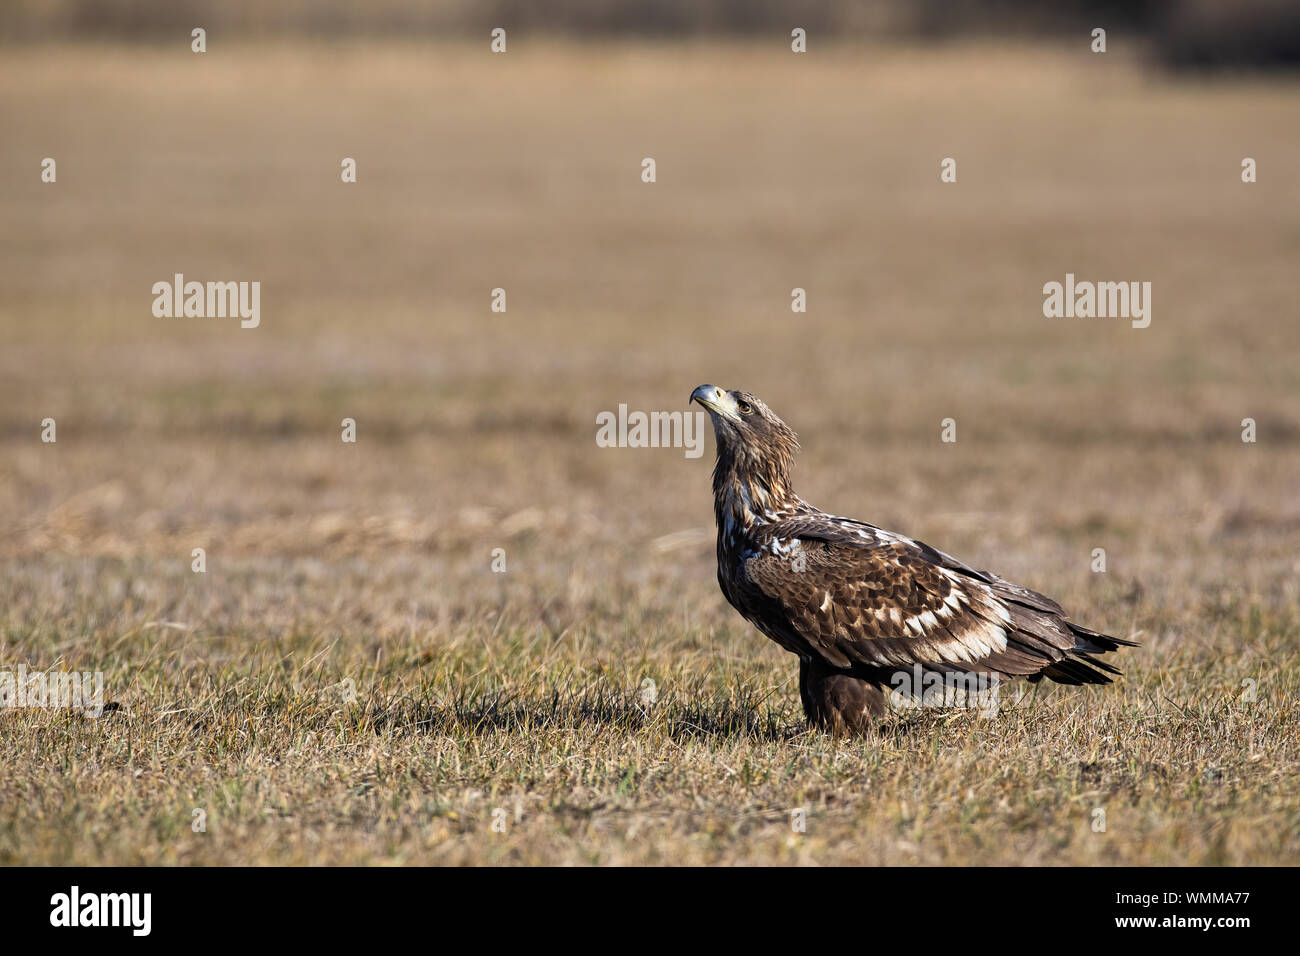 Young white-tailed eagle sitting on a meadow with dry grass in winter. Stock Photo